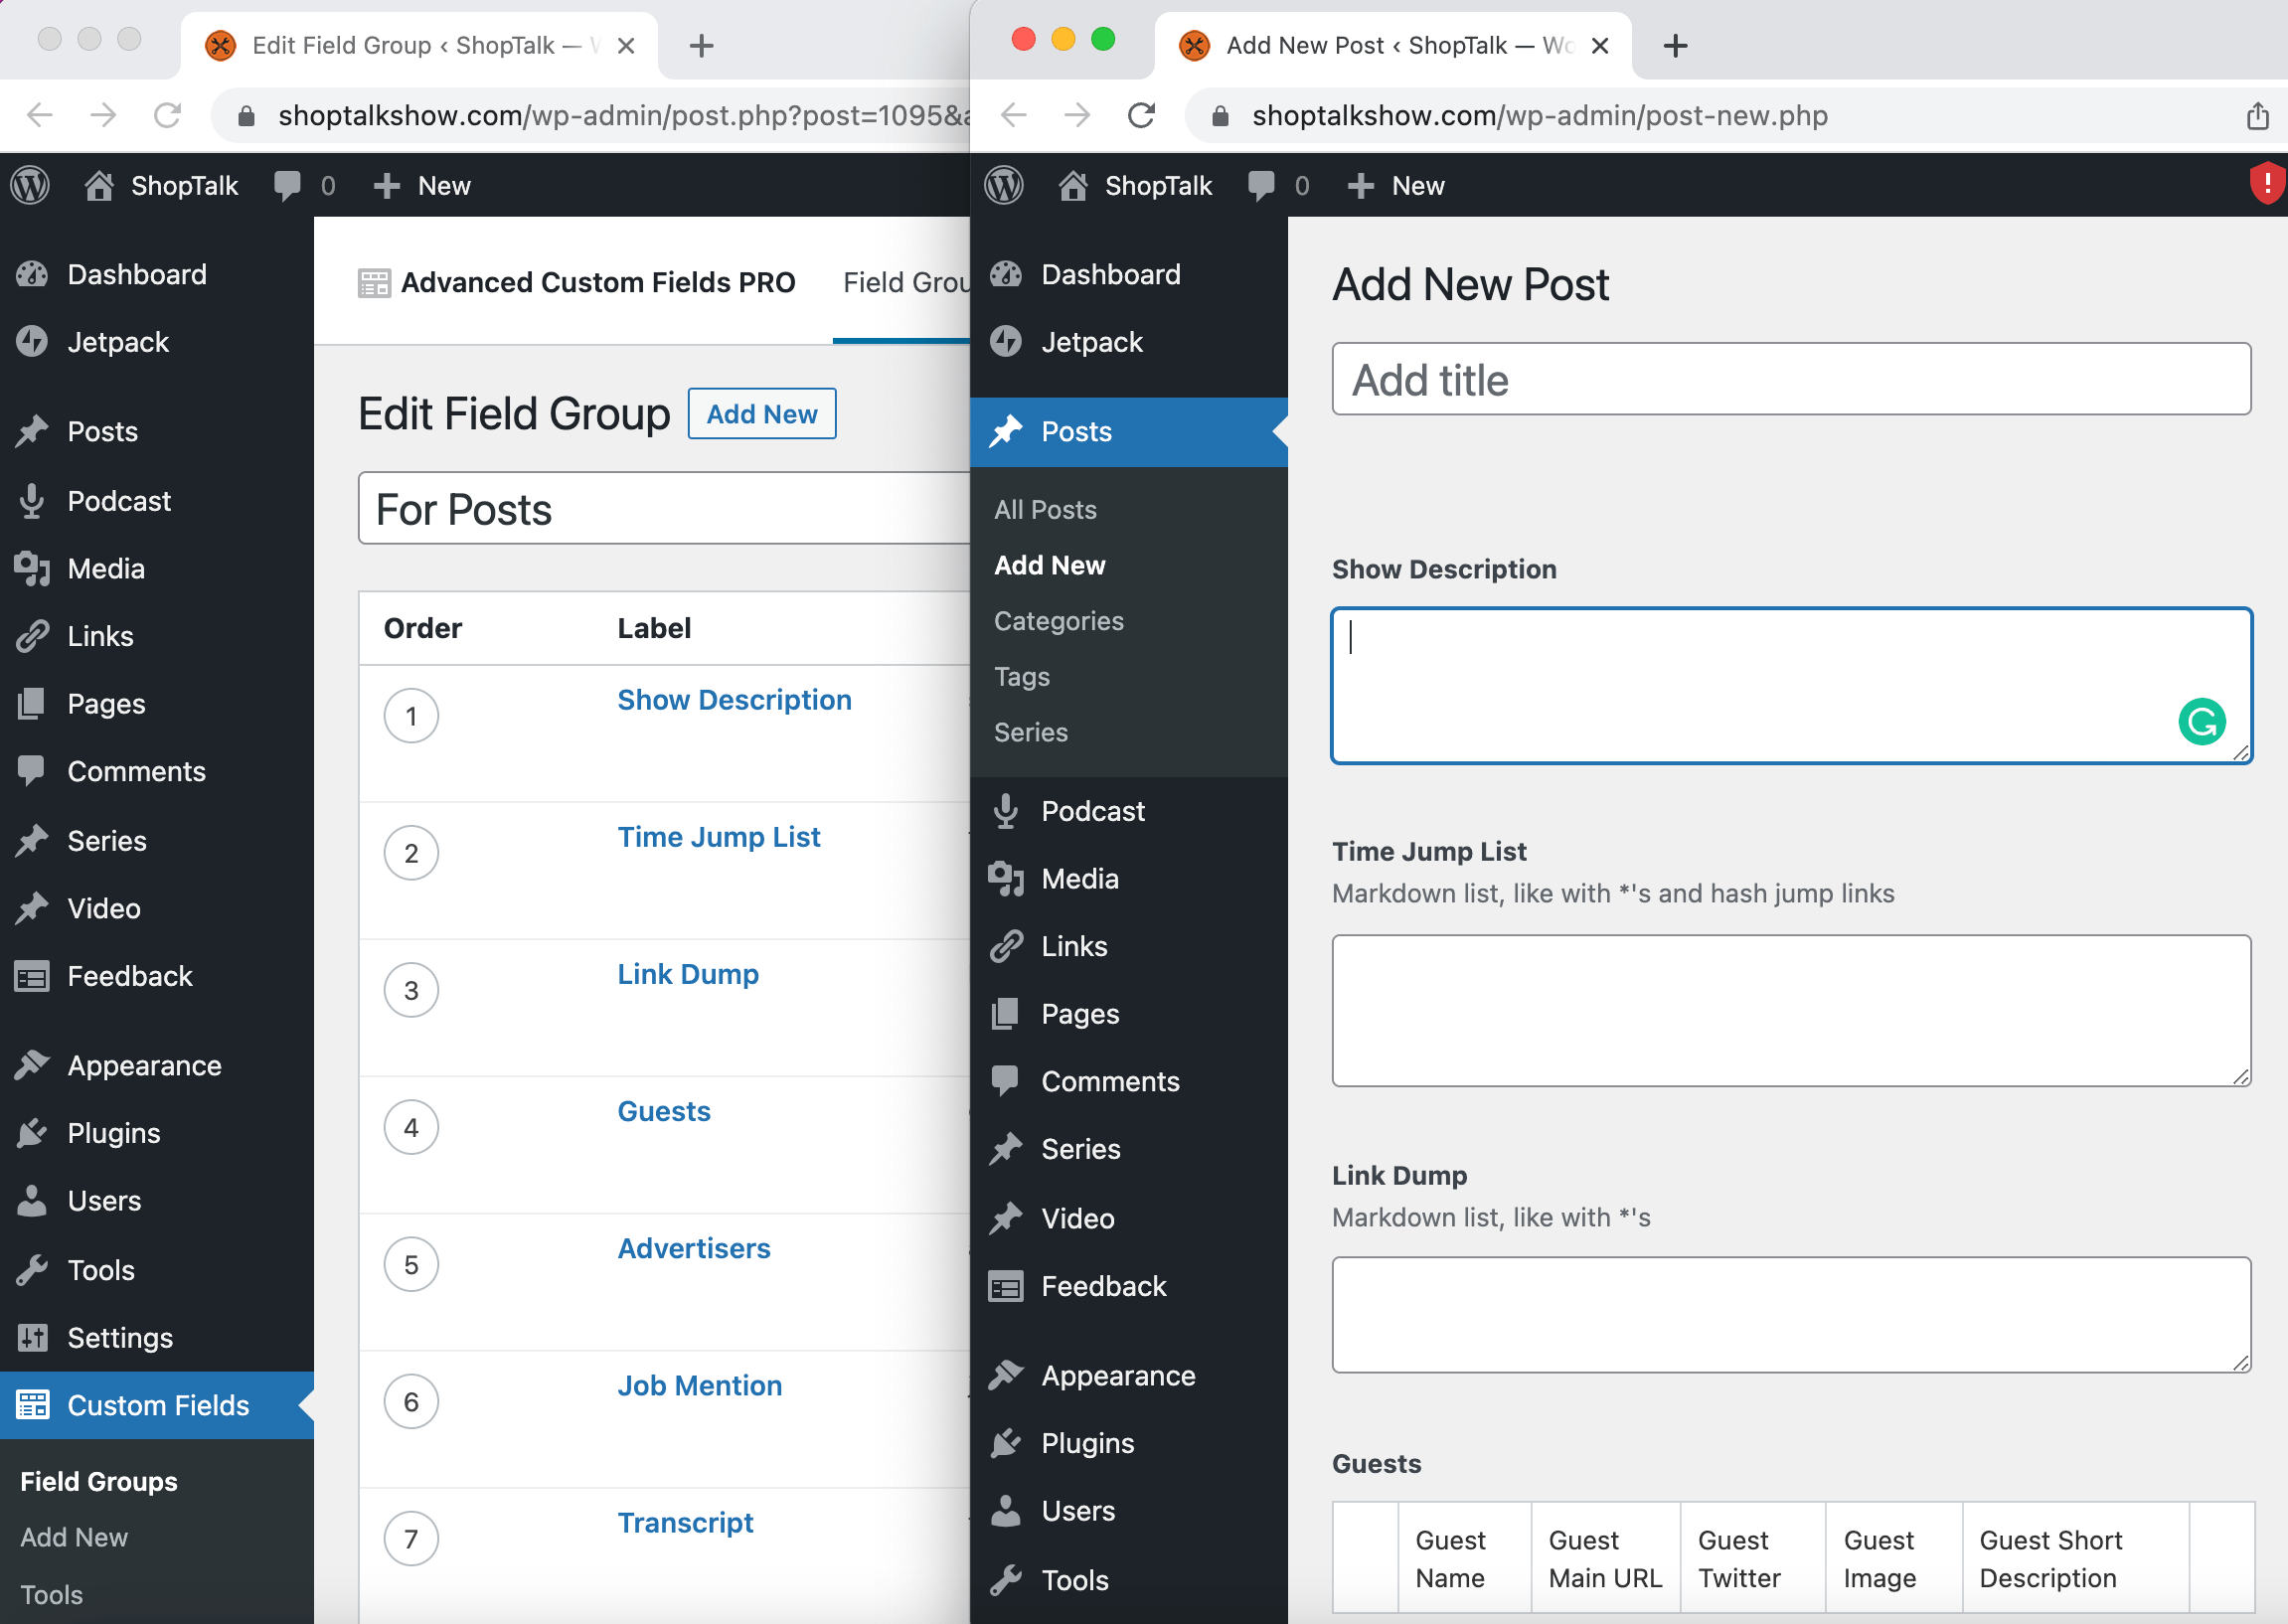 Side by side showing the settings for custom fields in the Advanced Custom Fields plugin on the left, and those custom fields displayed on the right in the WordPress Block Editor of a new post.